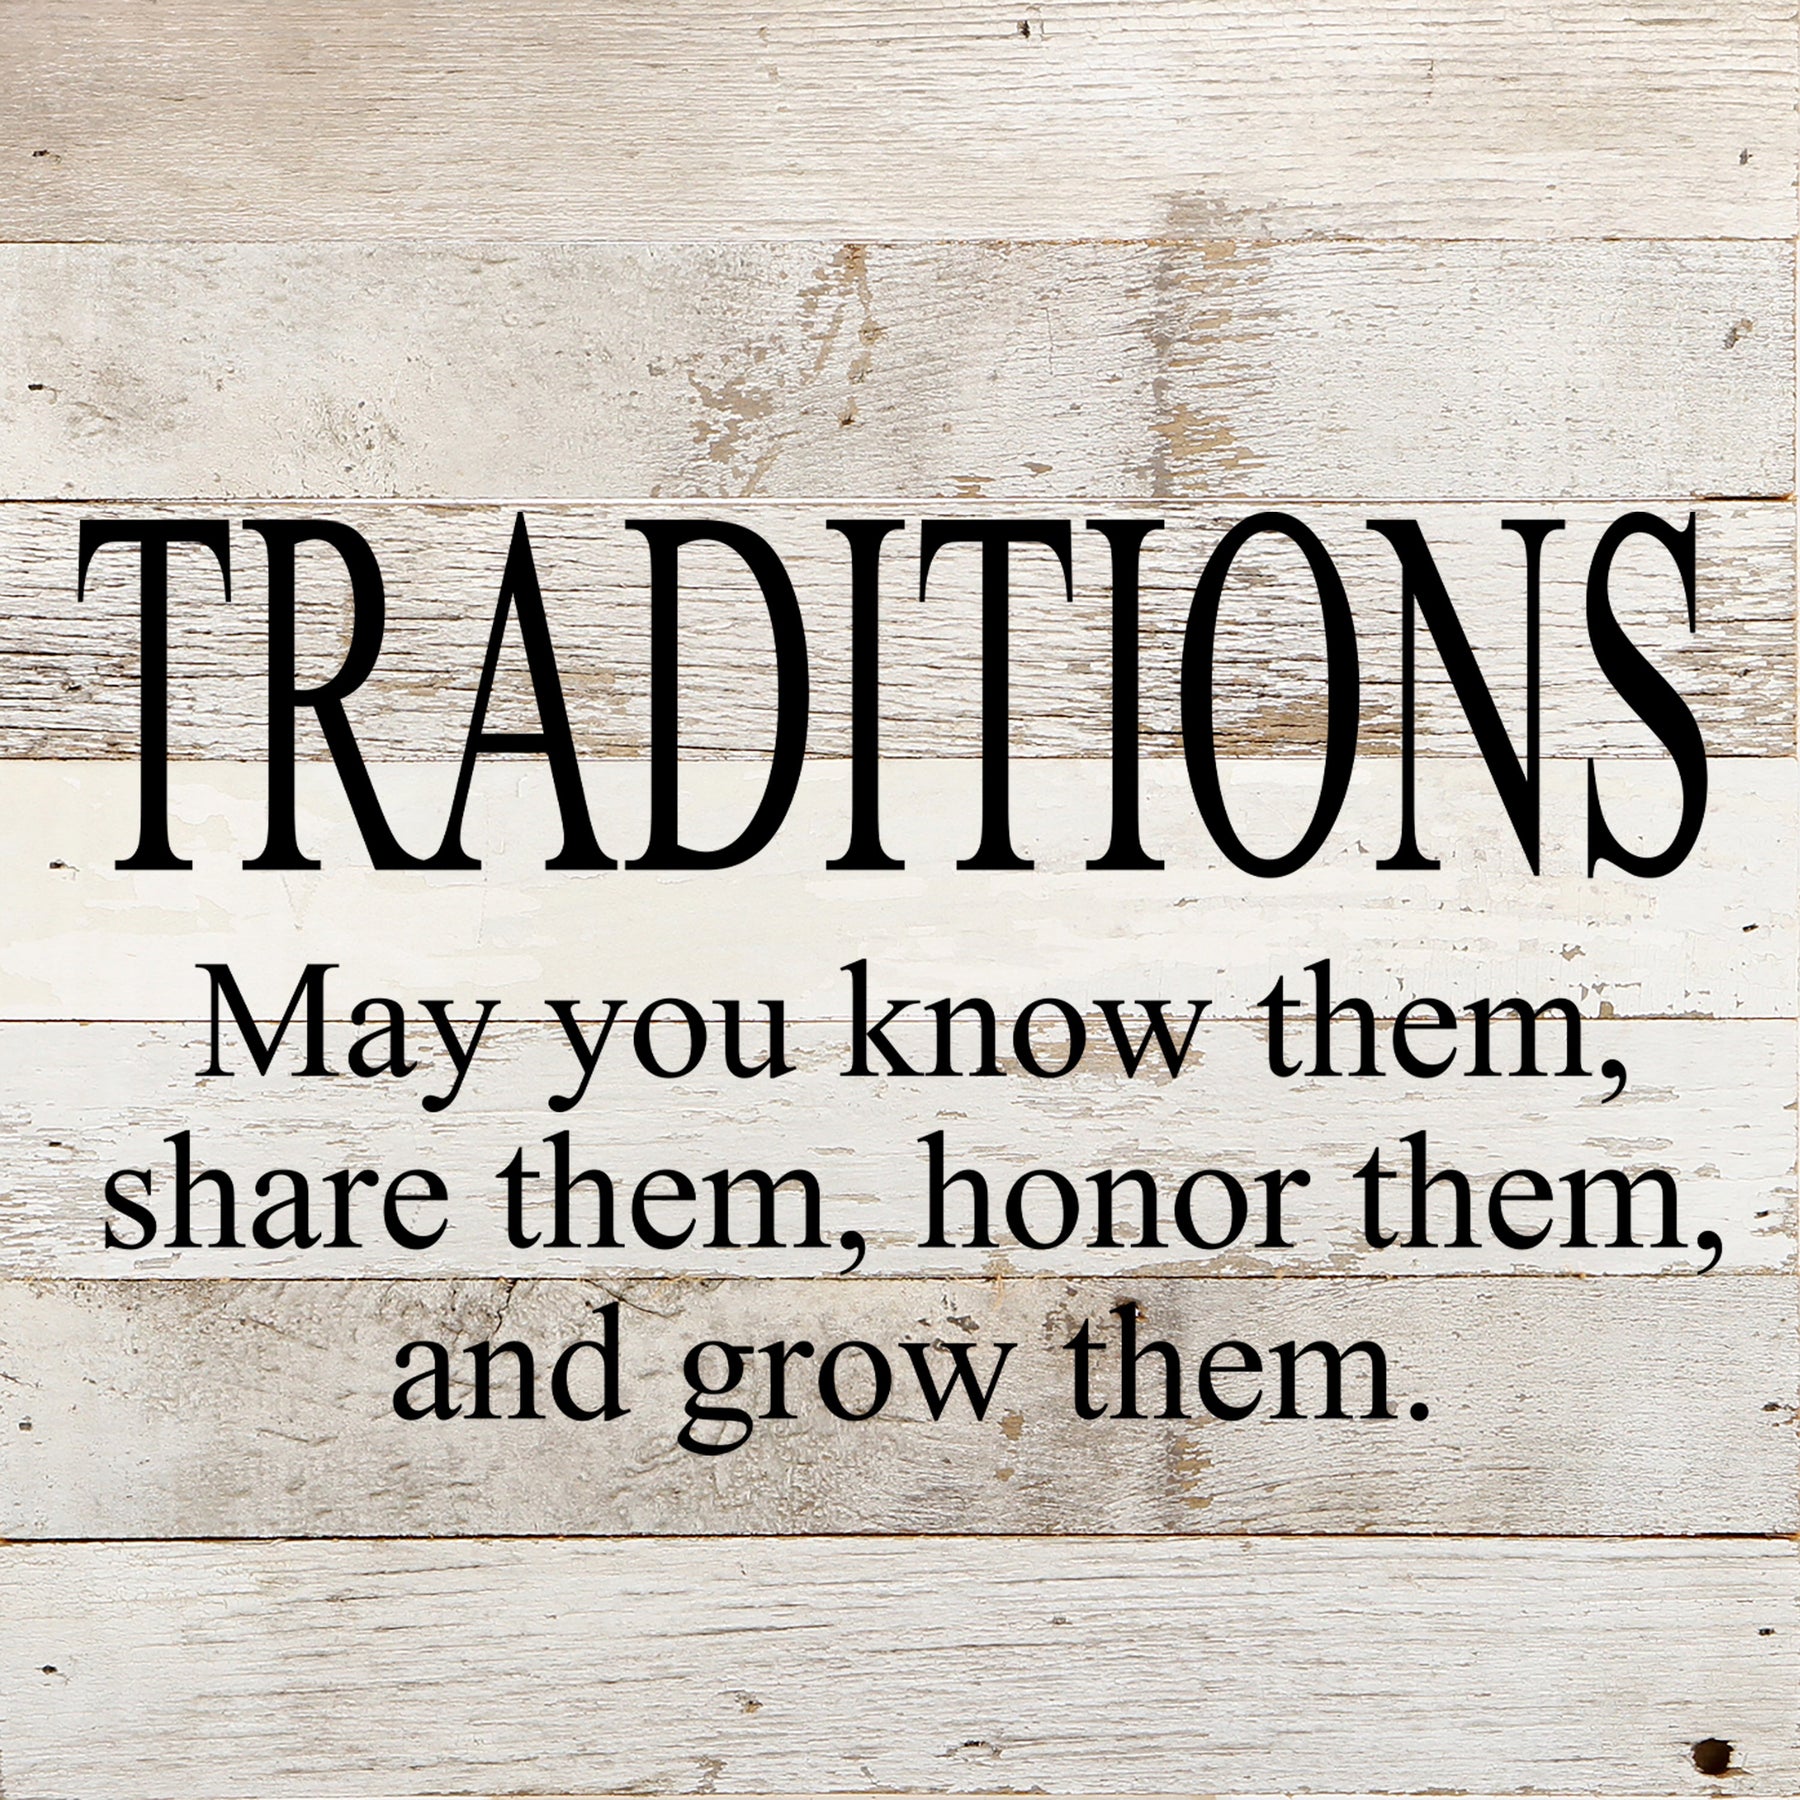 Traditions. May you know them, share them, honor them and grow them. / 10"x10" Reclaimed Wood Sign